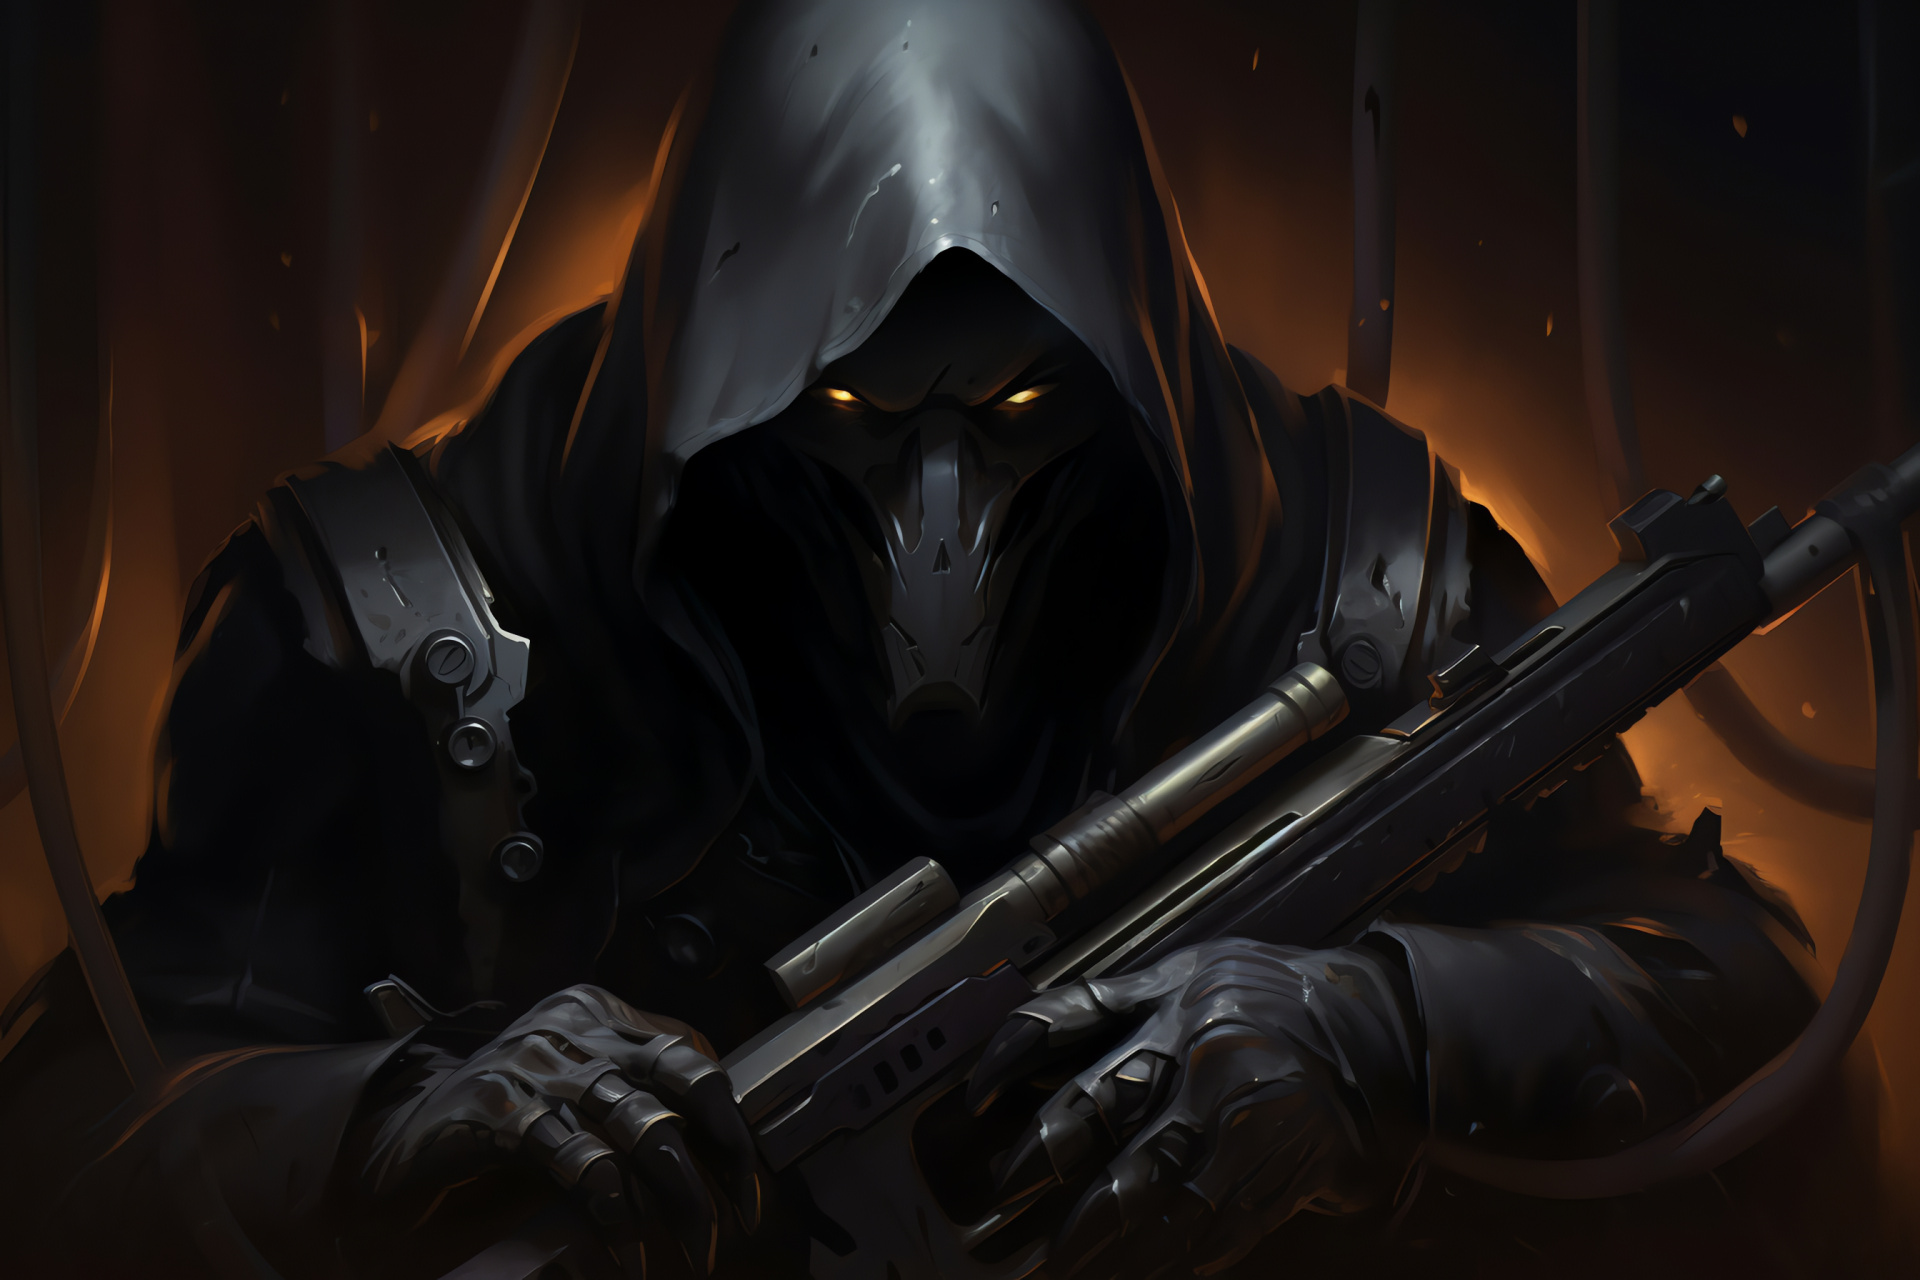 Overwatch Reaper avatar, Game entity, Wraith-like assailant, Dual-wielded armaments, Ominous protective gear, HD Desktop Wallpaper